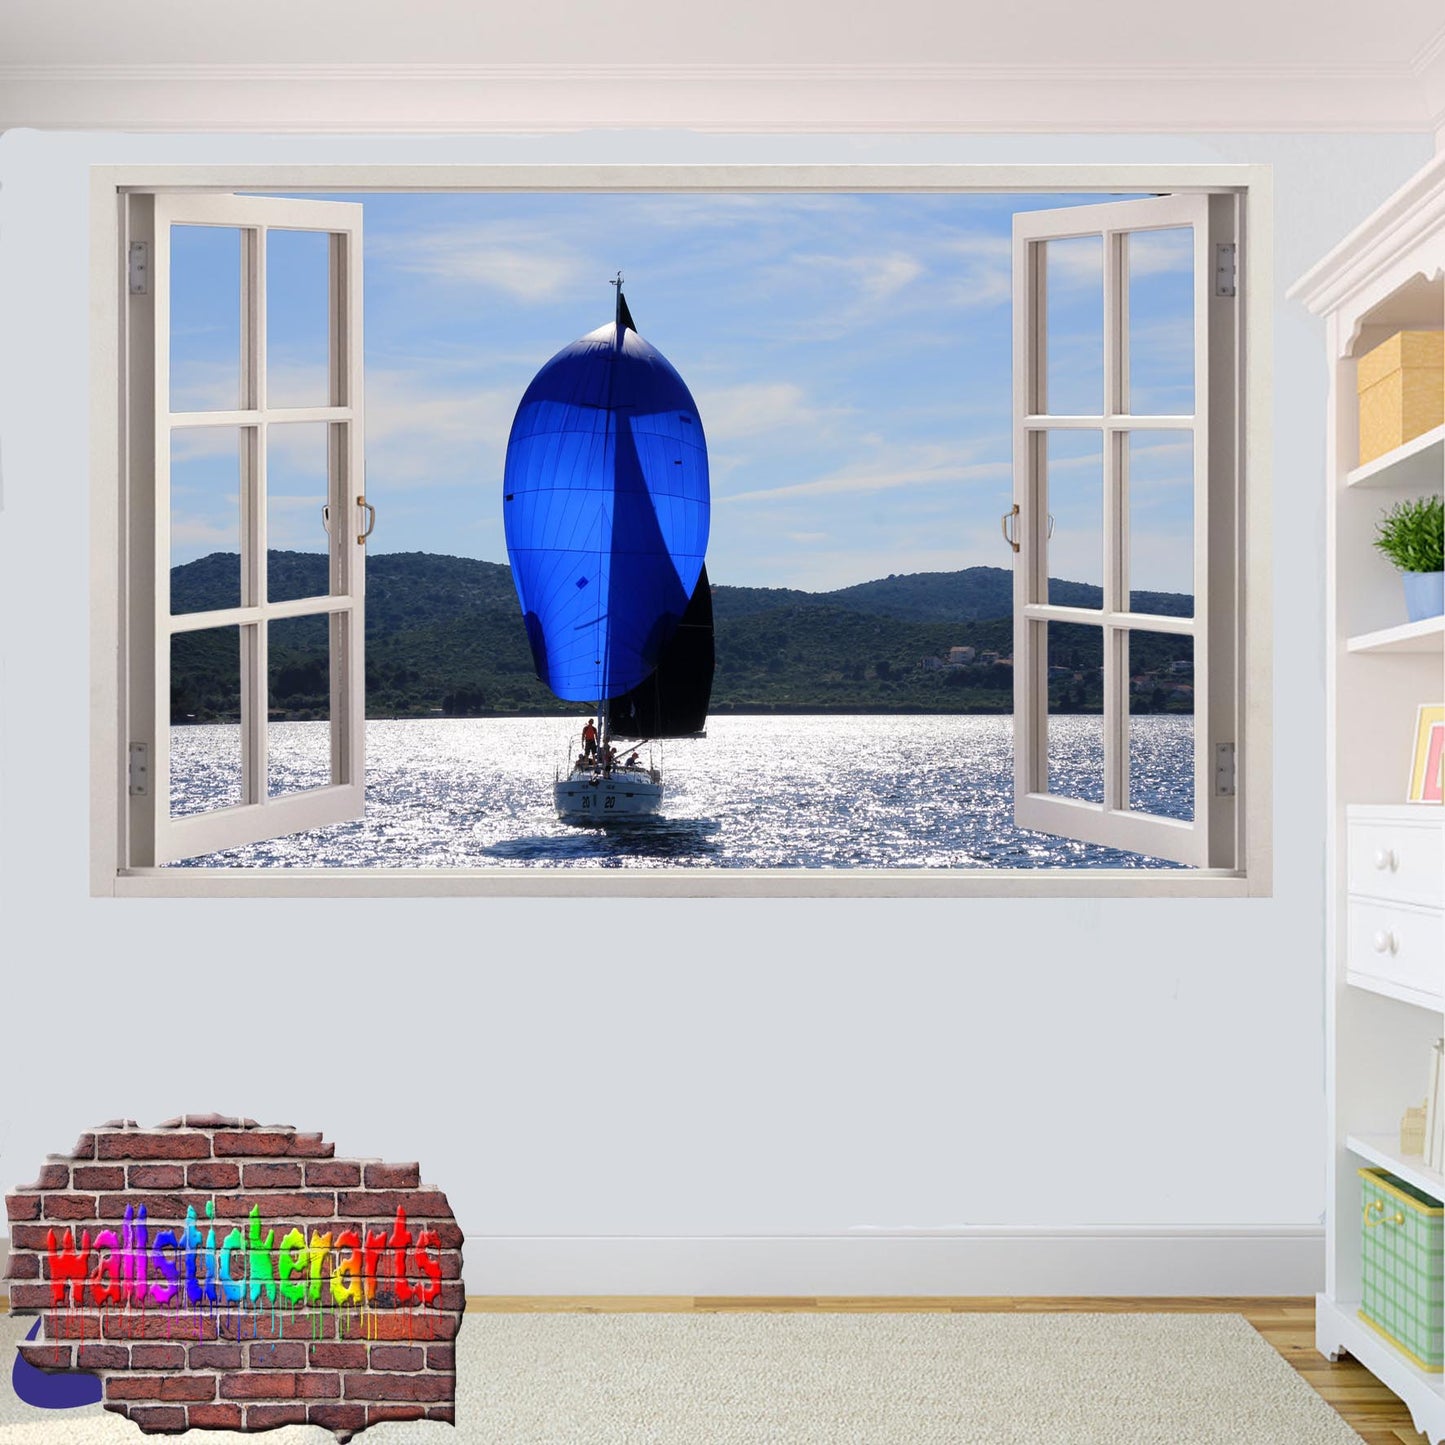 Sail Sailing Sports 3d Window Effect Wall Sticker Room Office Nursery Shop Decoration Decal Mural YJ5